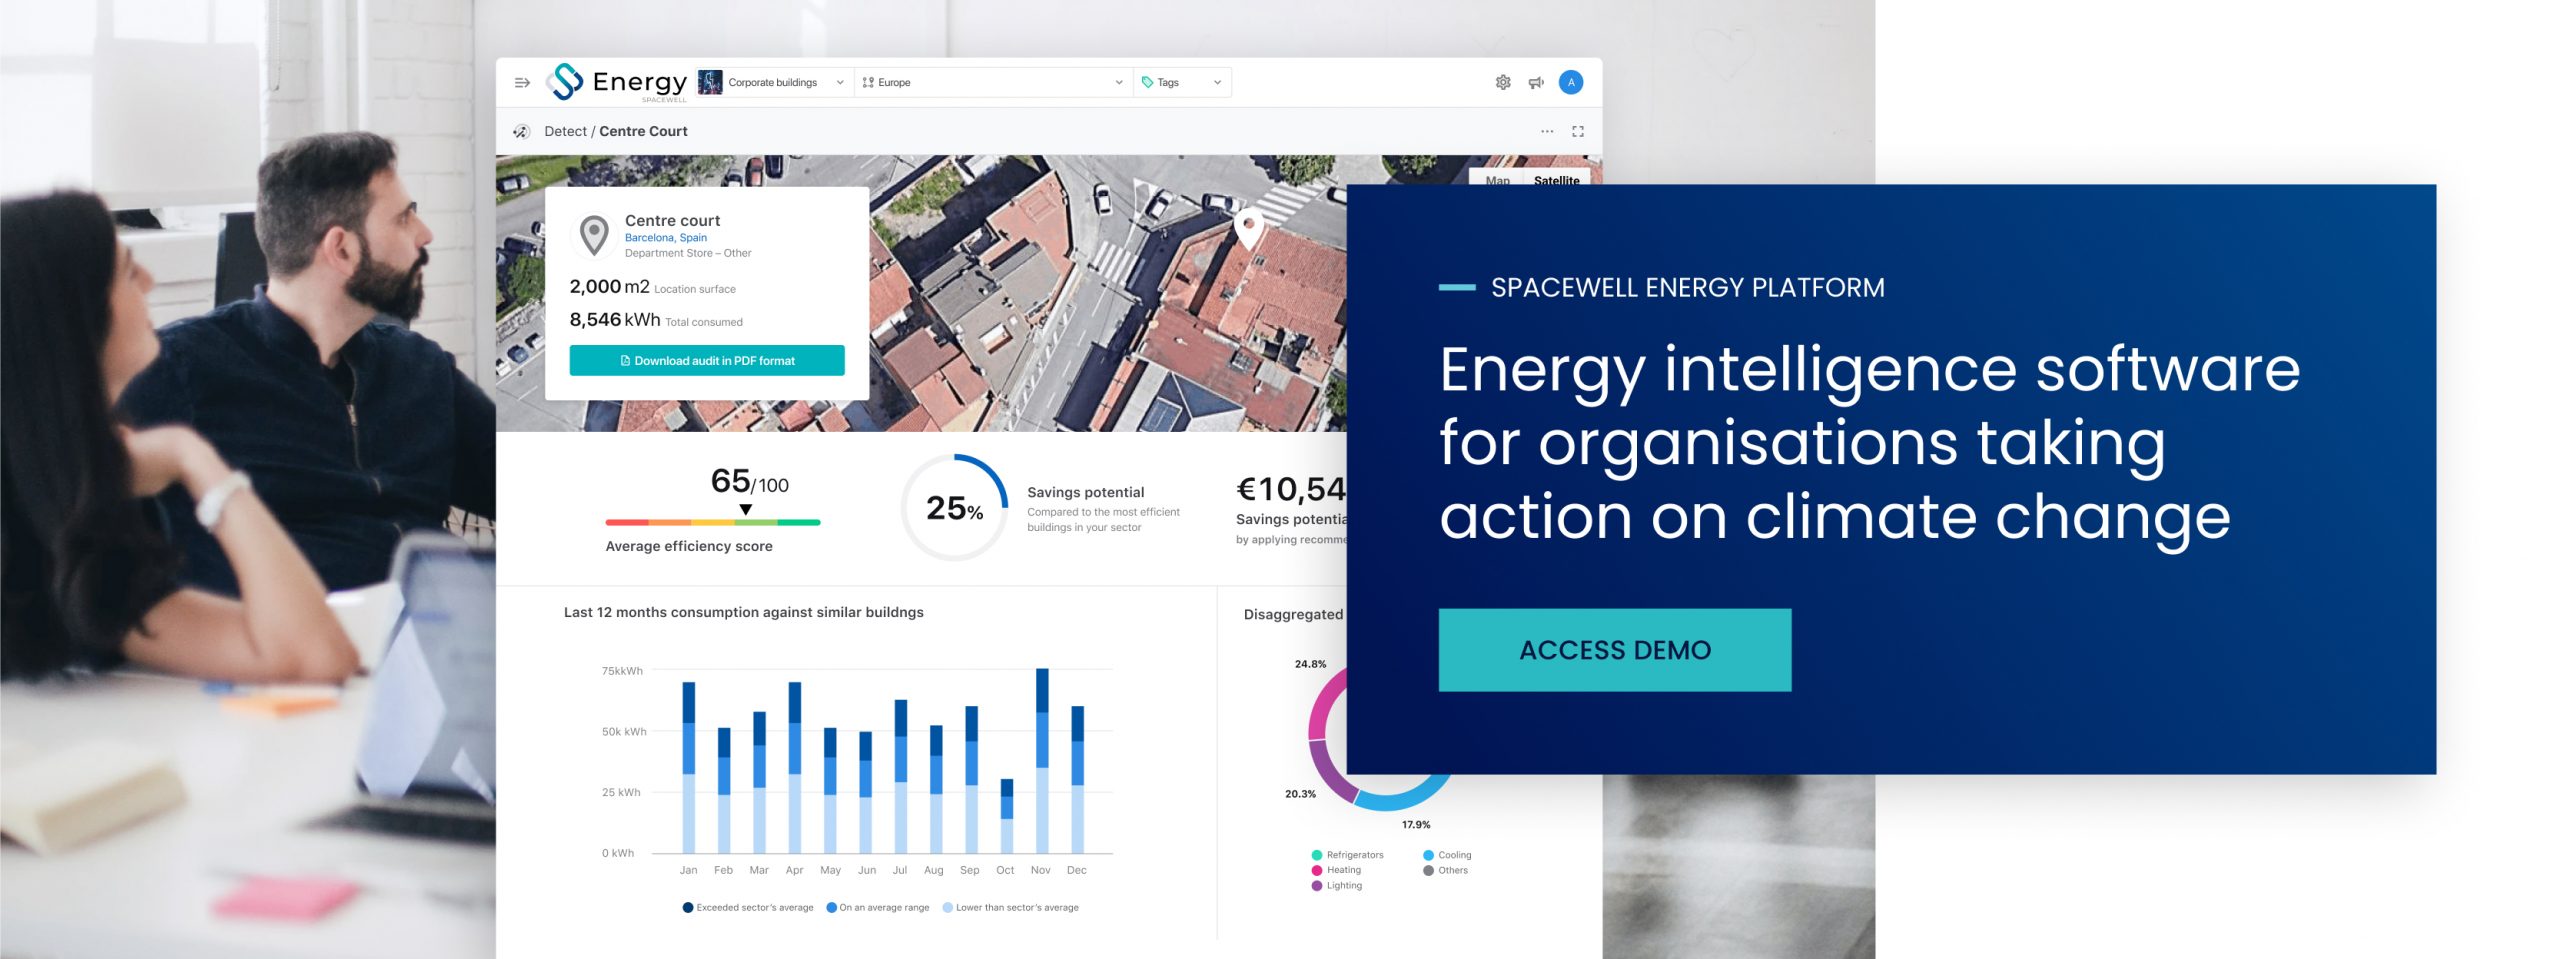 Spacewell Energy by Dexma - Energy Intelligence Software